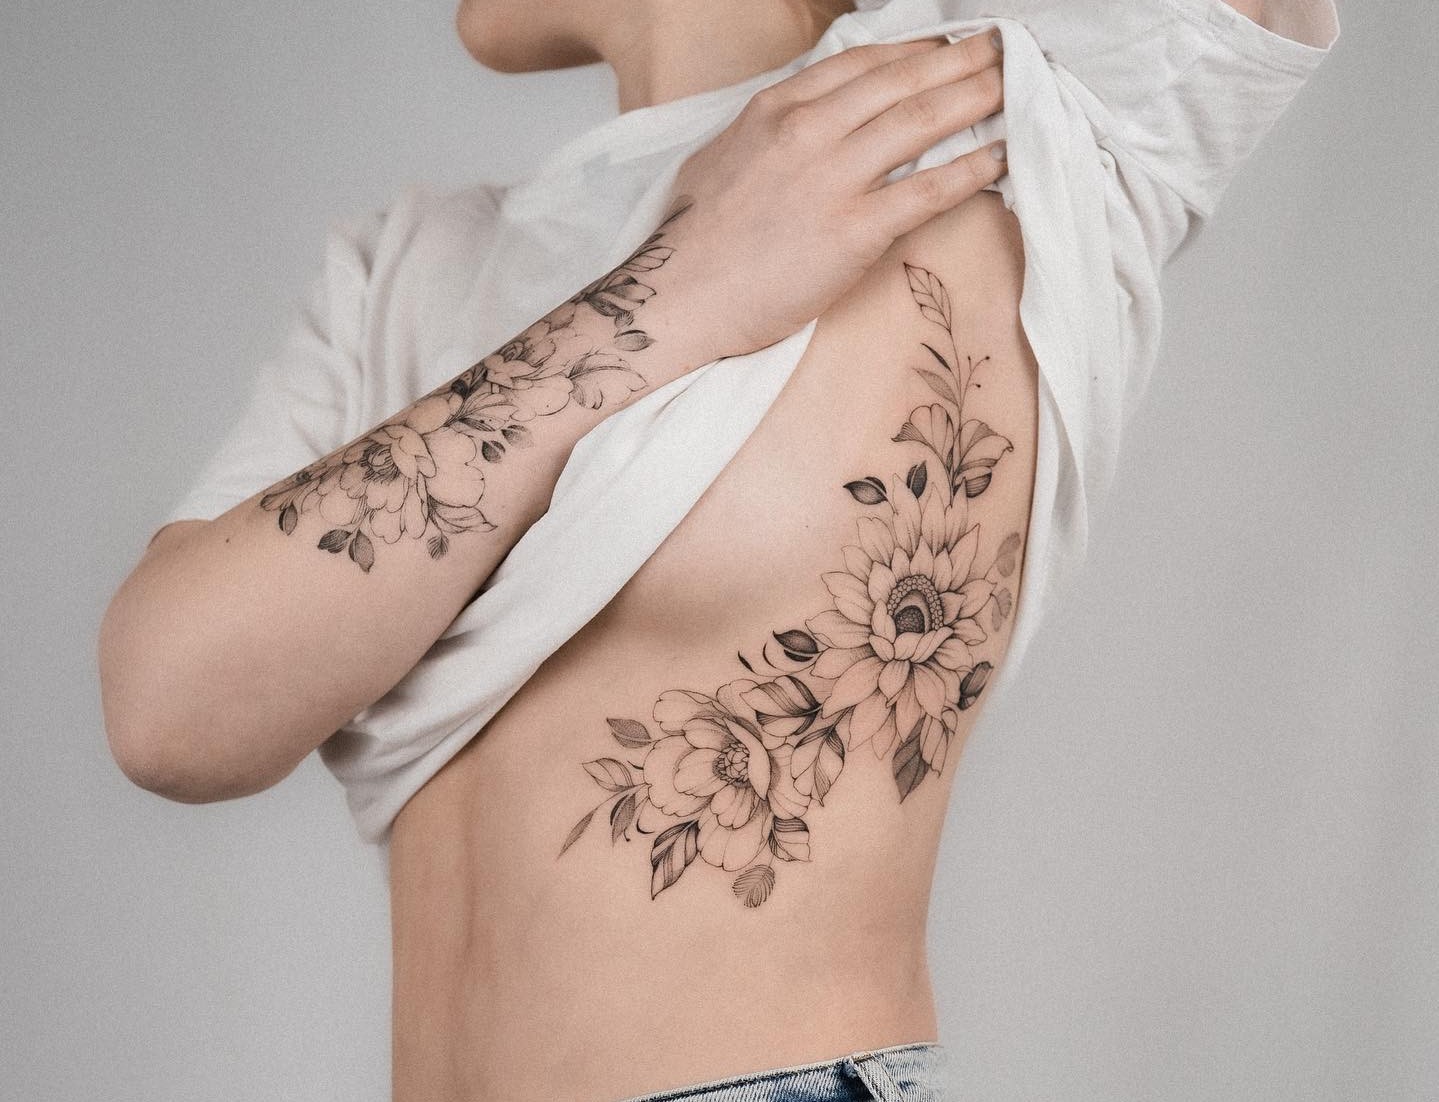 75 Best Rib Tattoos Designs  Meanings  All Types 2019